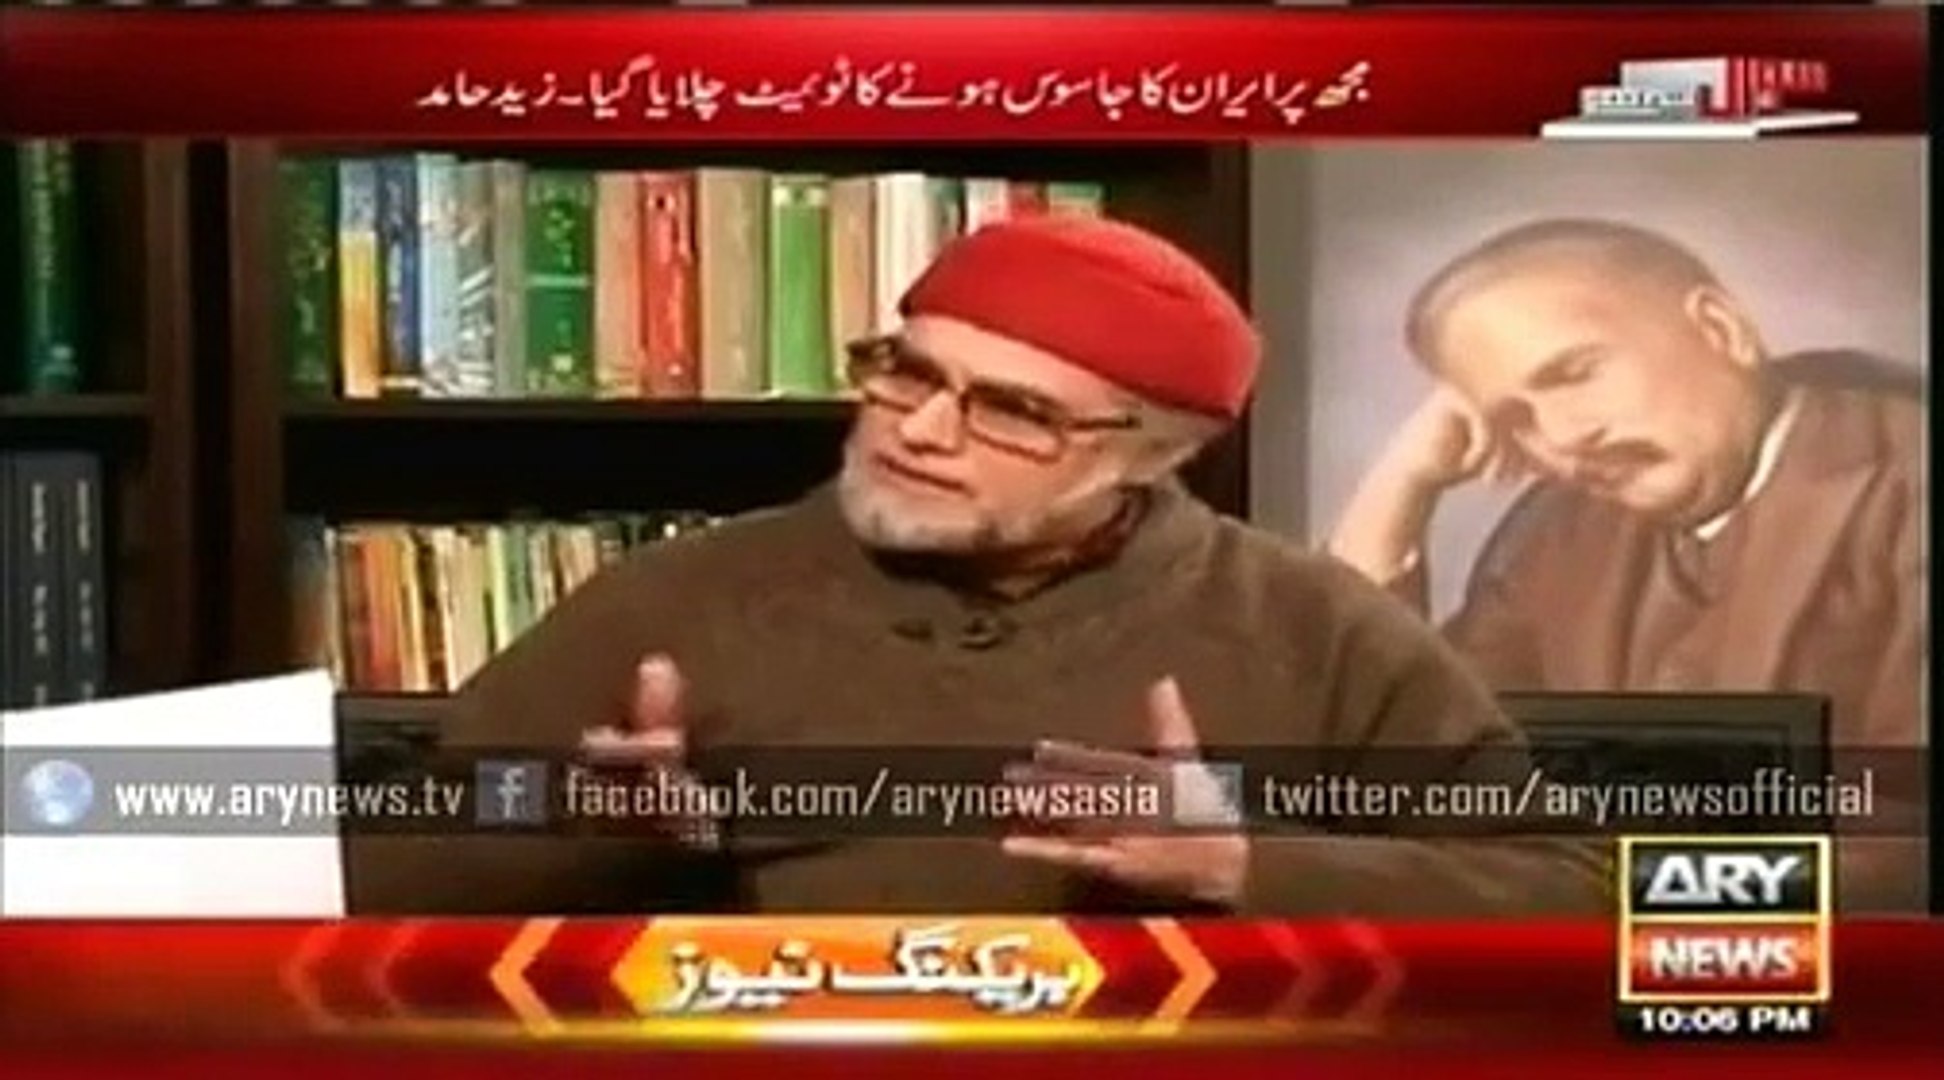 Ary News Headlines 13 December 2015 , Latest News Updates About Zaid Hamid